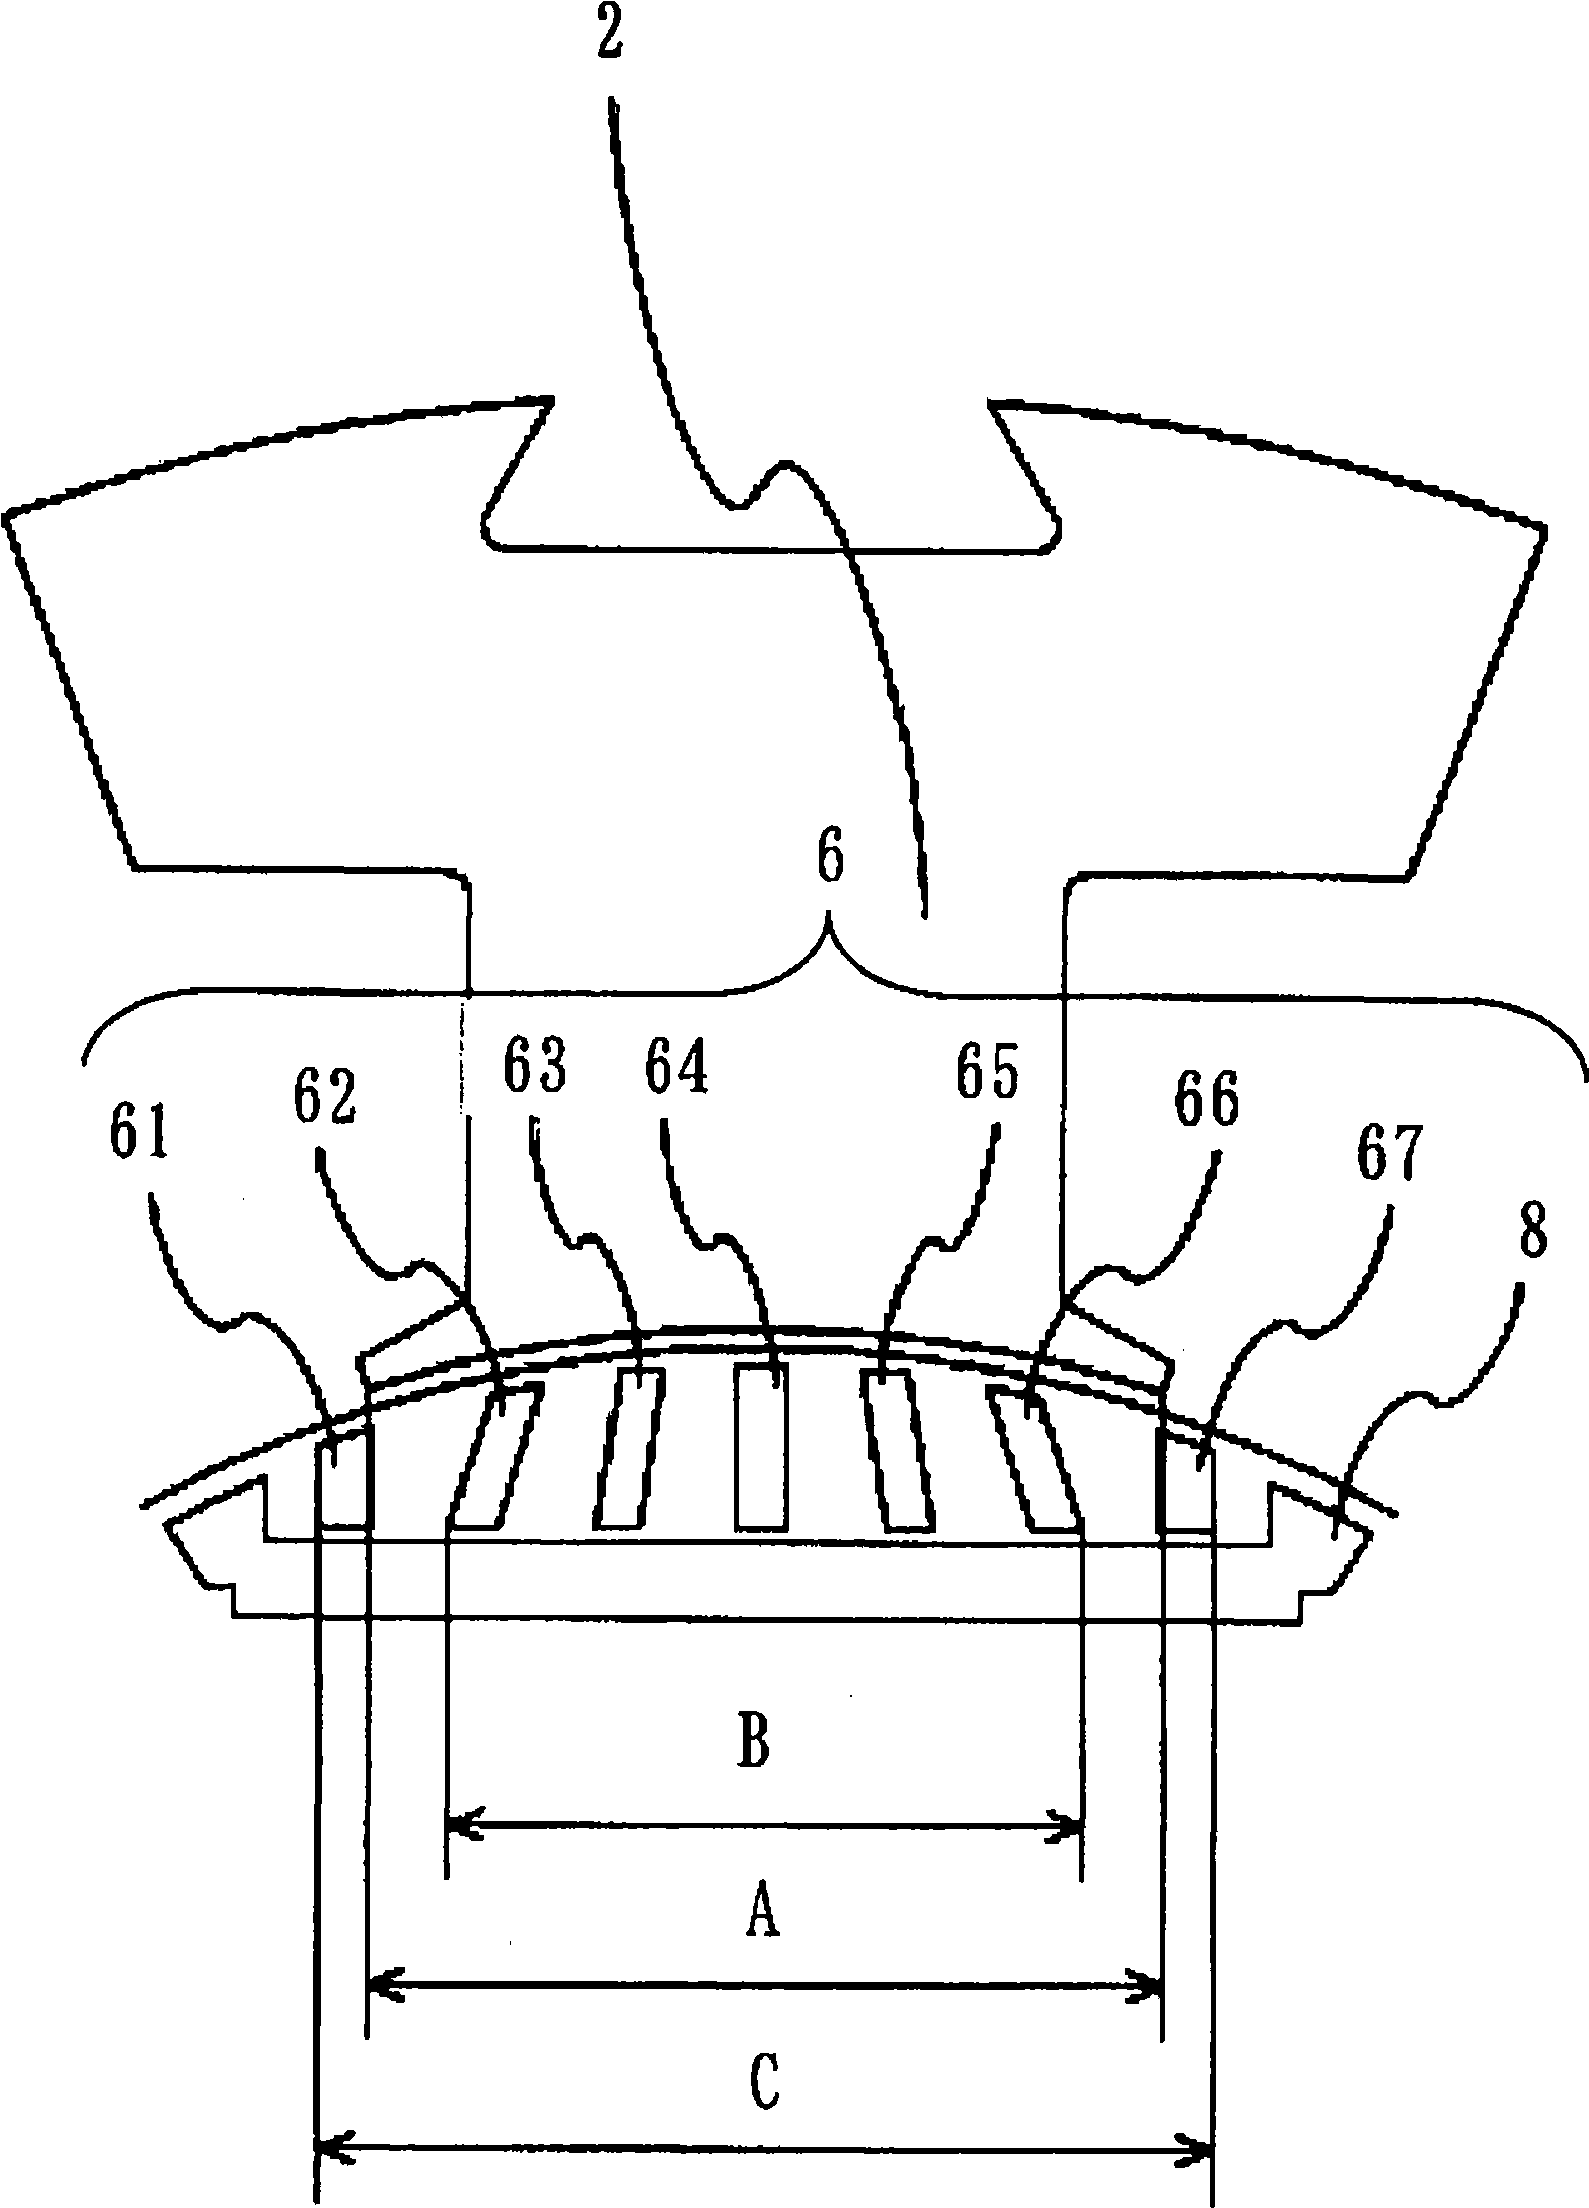 Permanent magnet synchronous motor and enclosed compressor